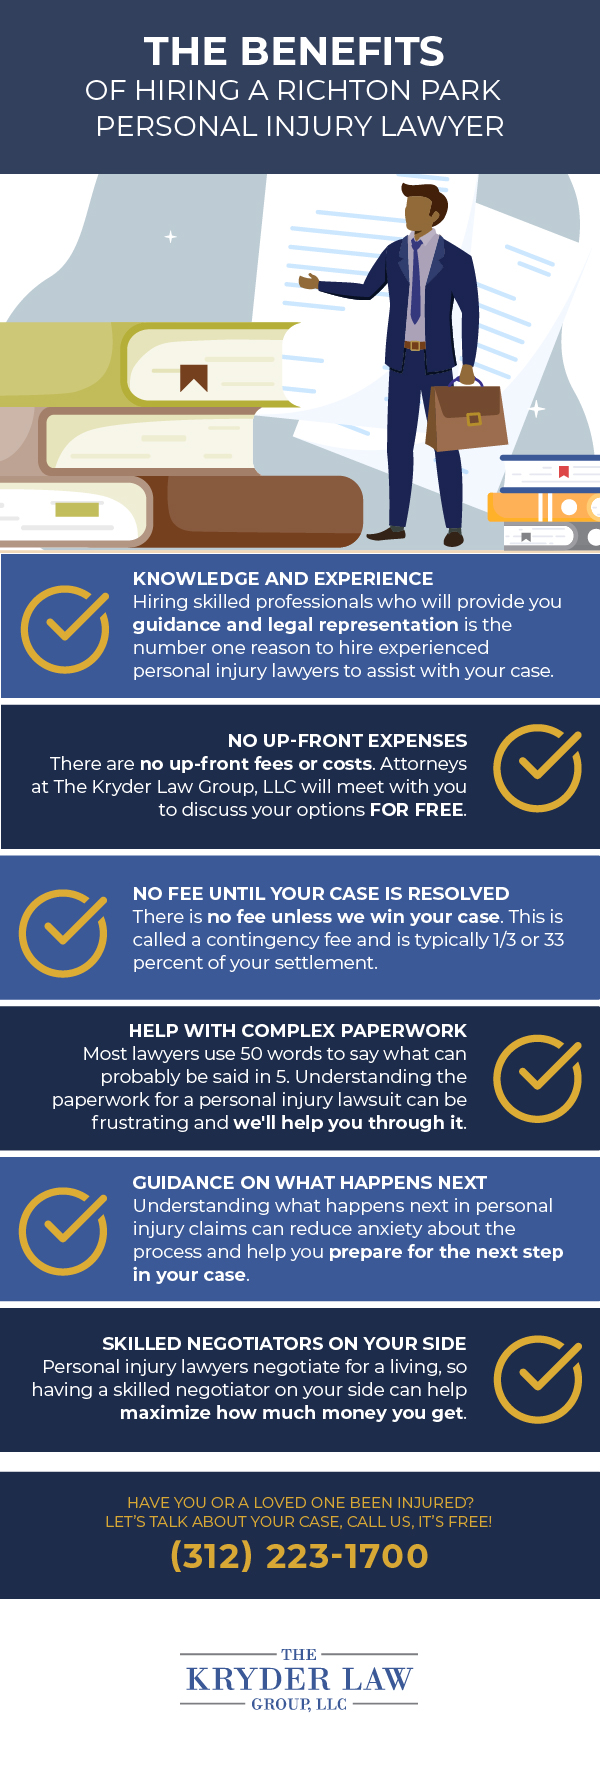 The Benefits of Hiring a Richton Park Personal Injury Lawyer Infographic